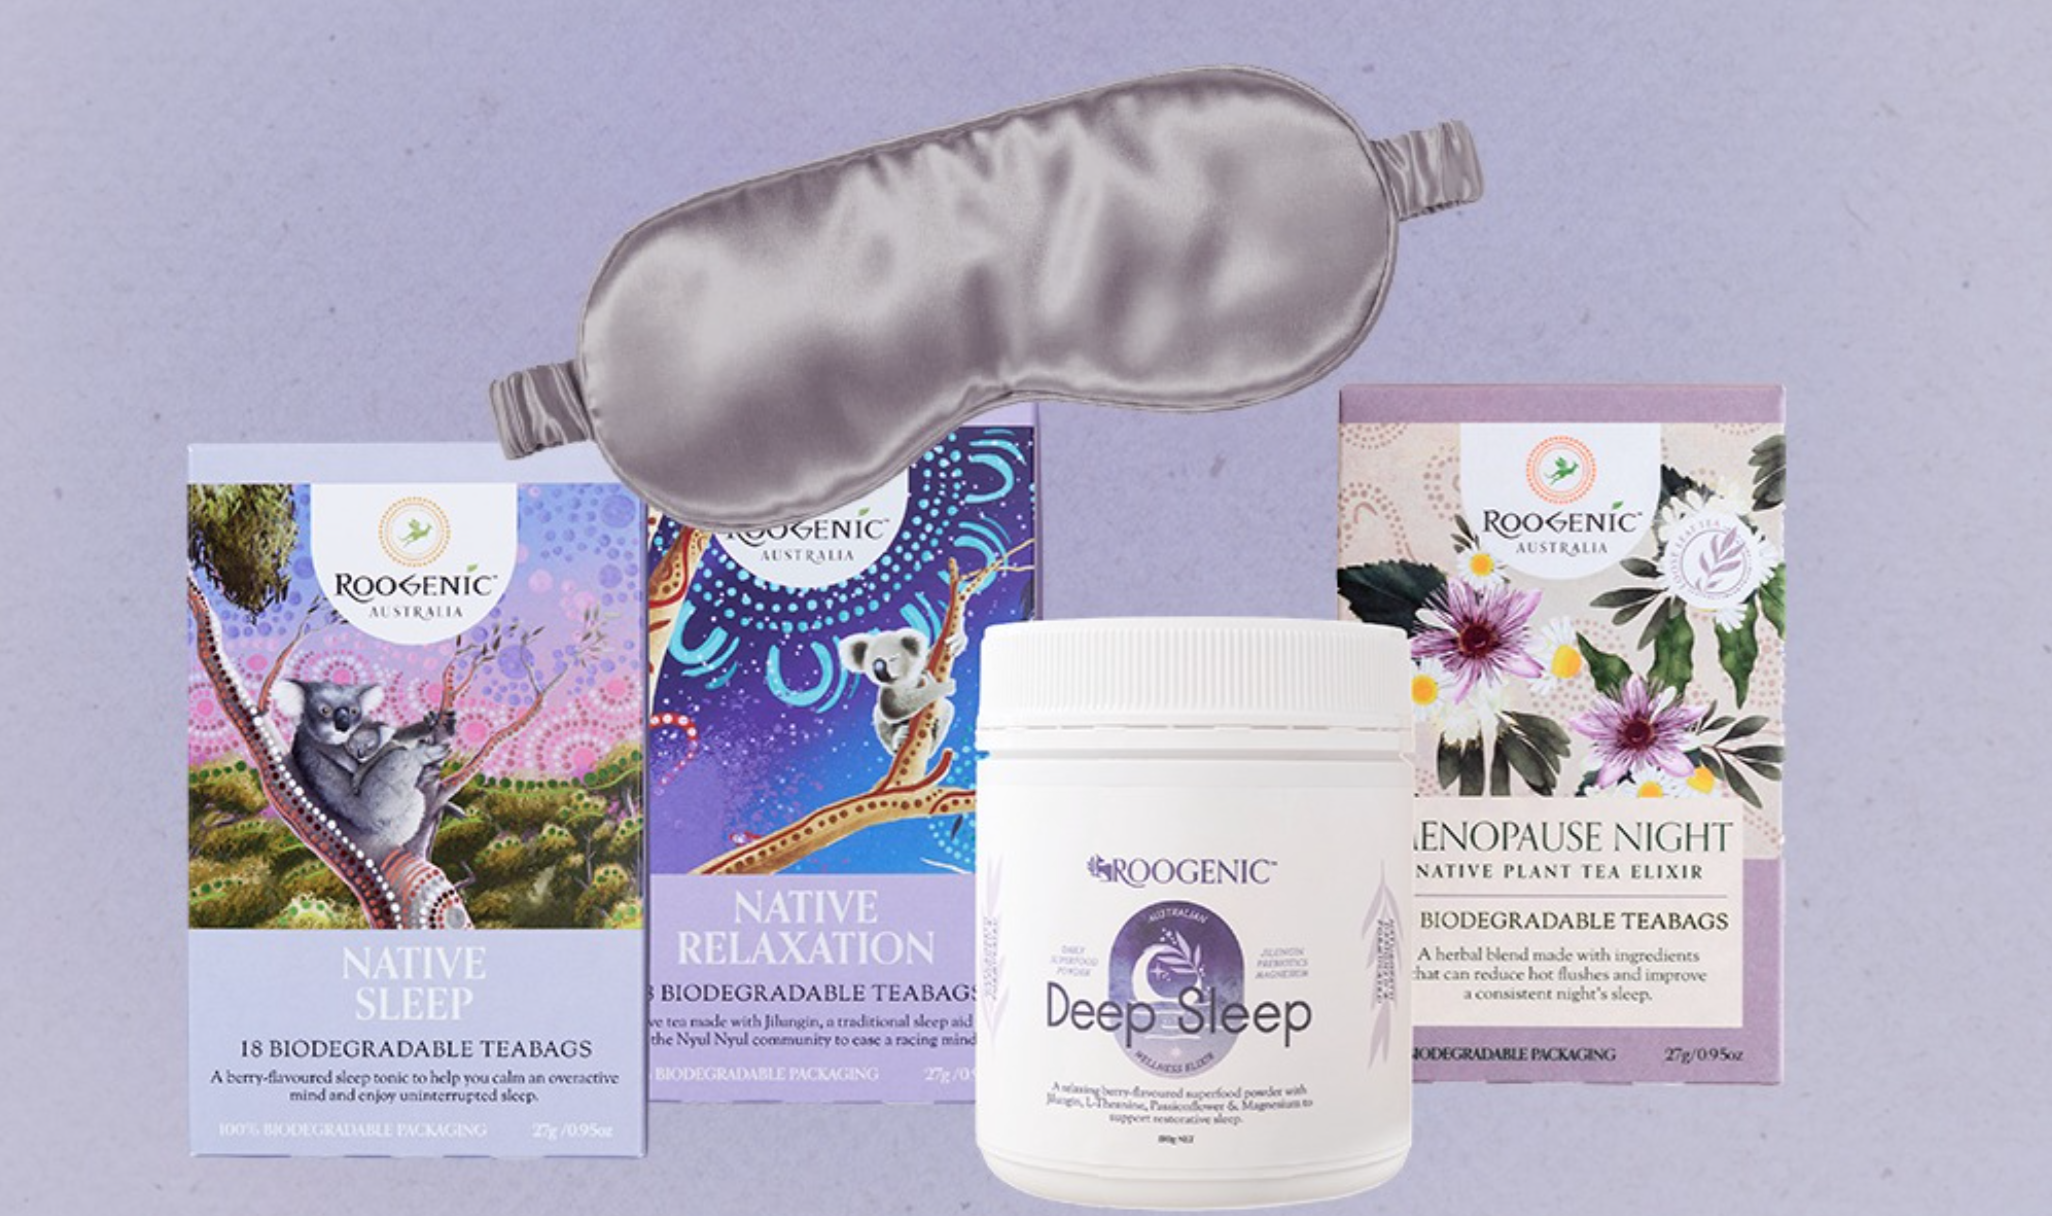 Sweet dreams are made of Roogenic’s native blends and now you can get a free sleep mask